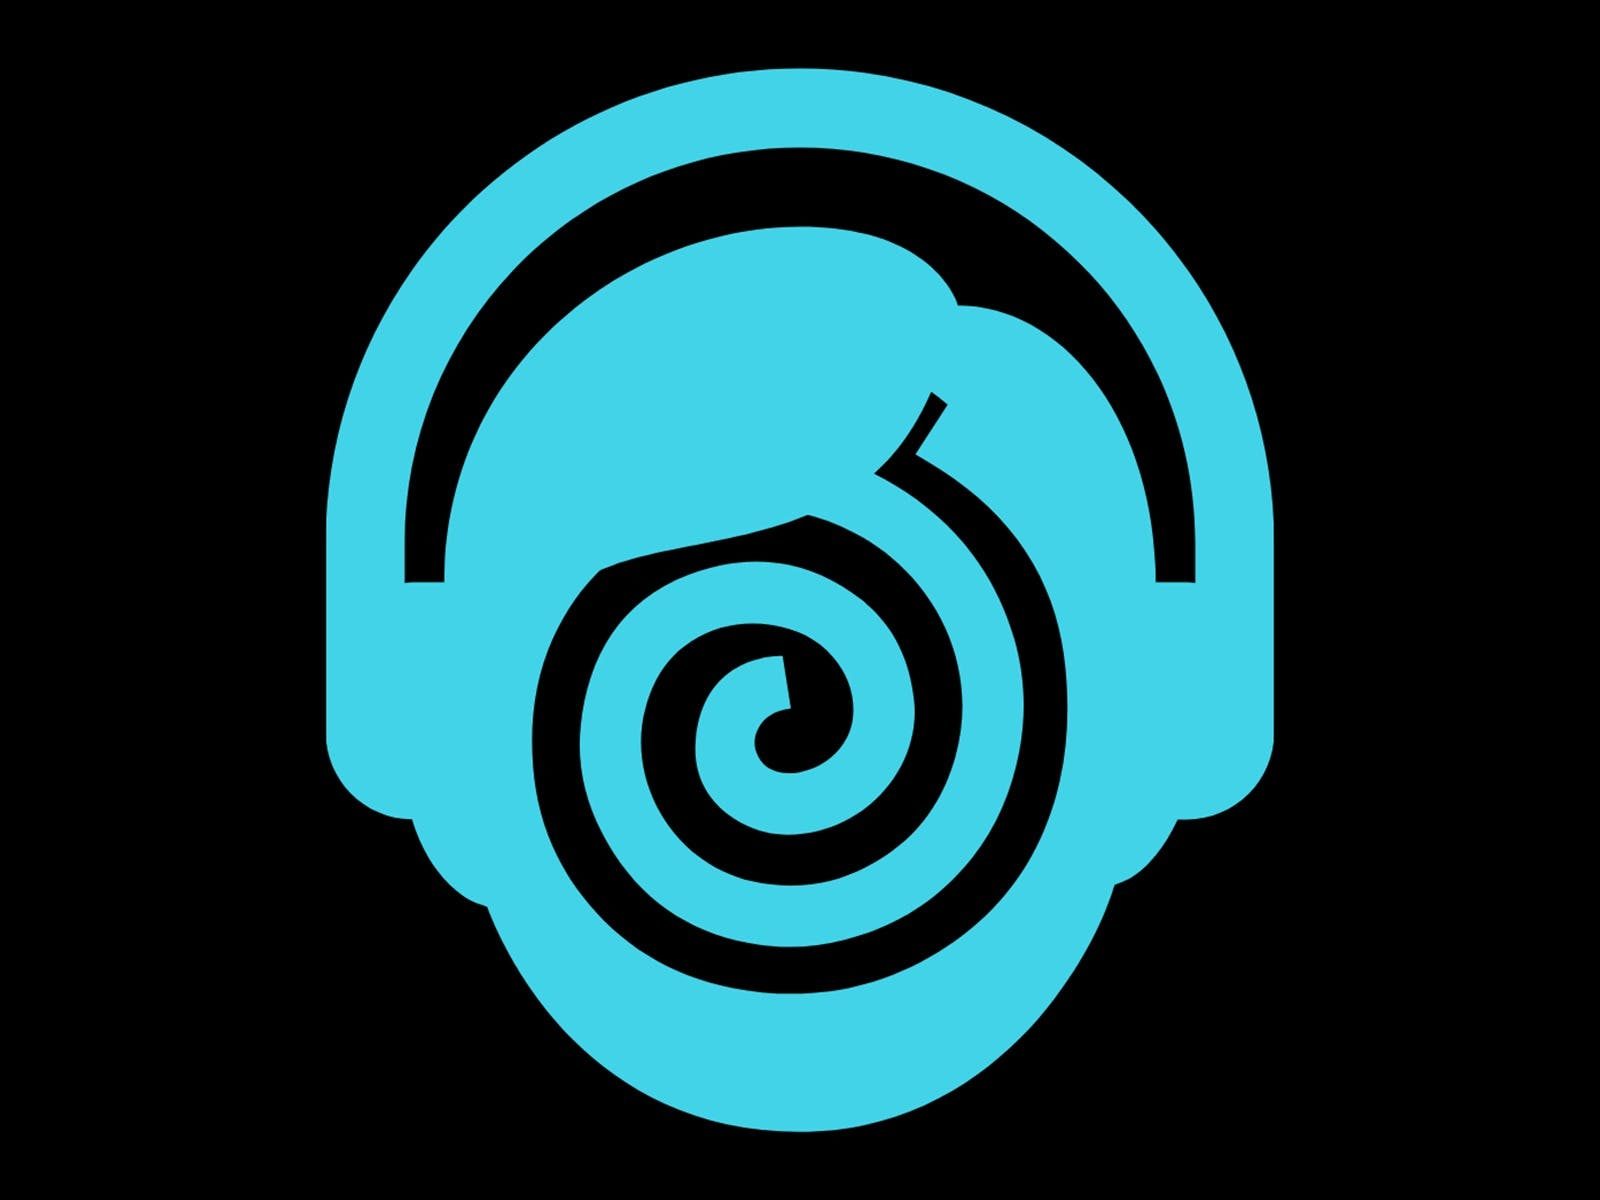 A black background with blue illustrated face and swirl